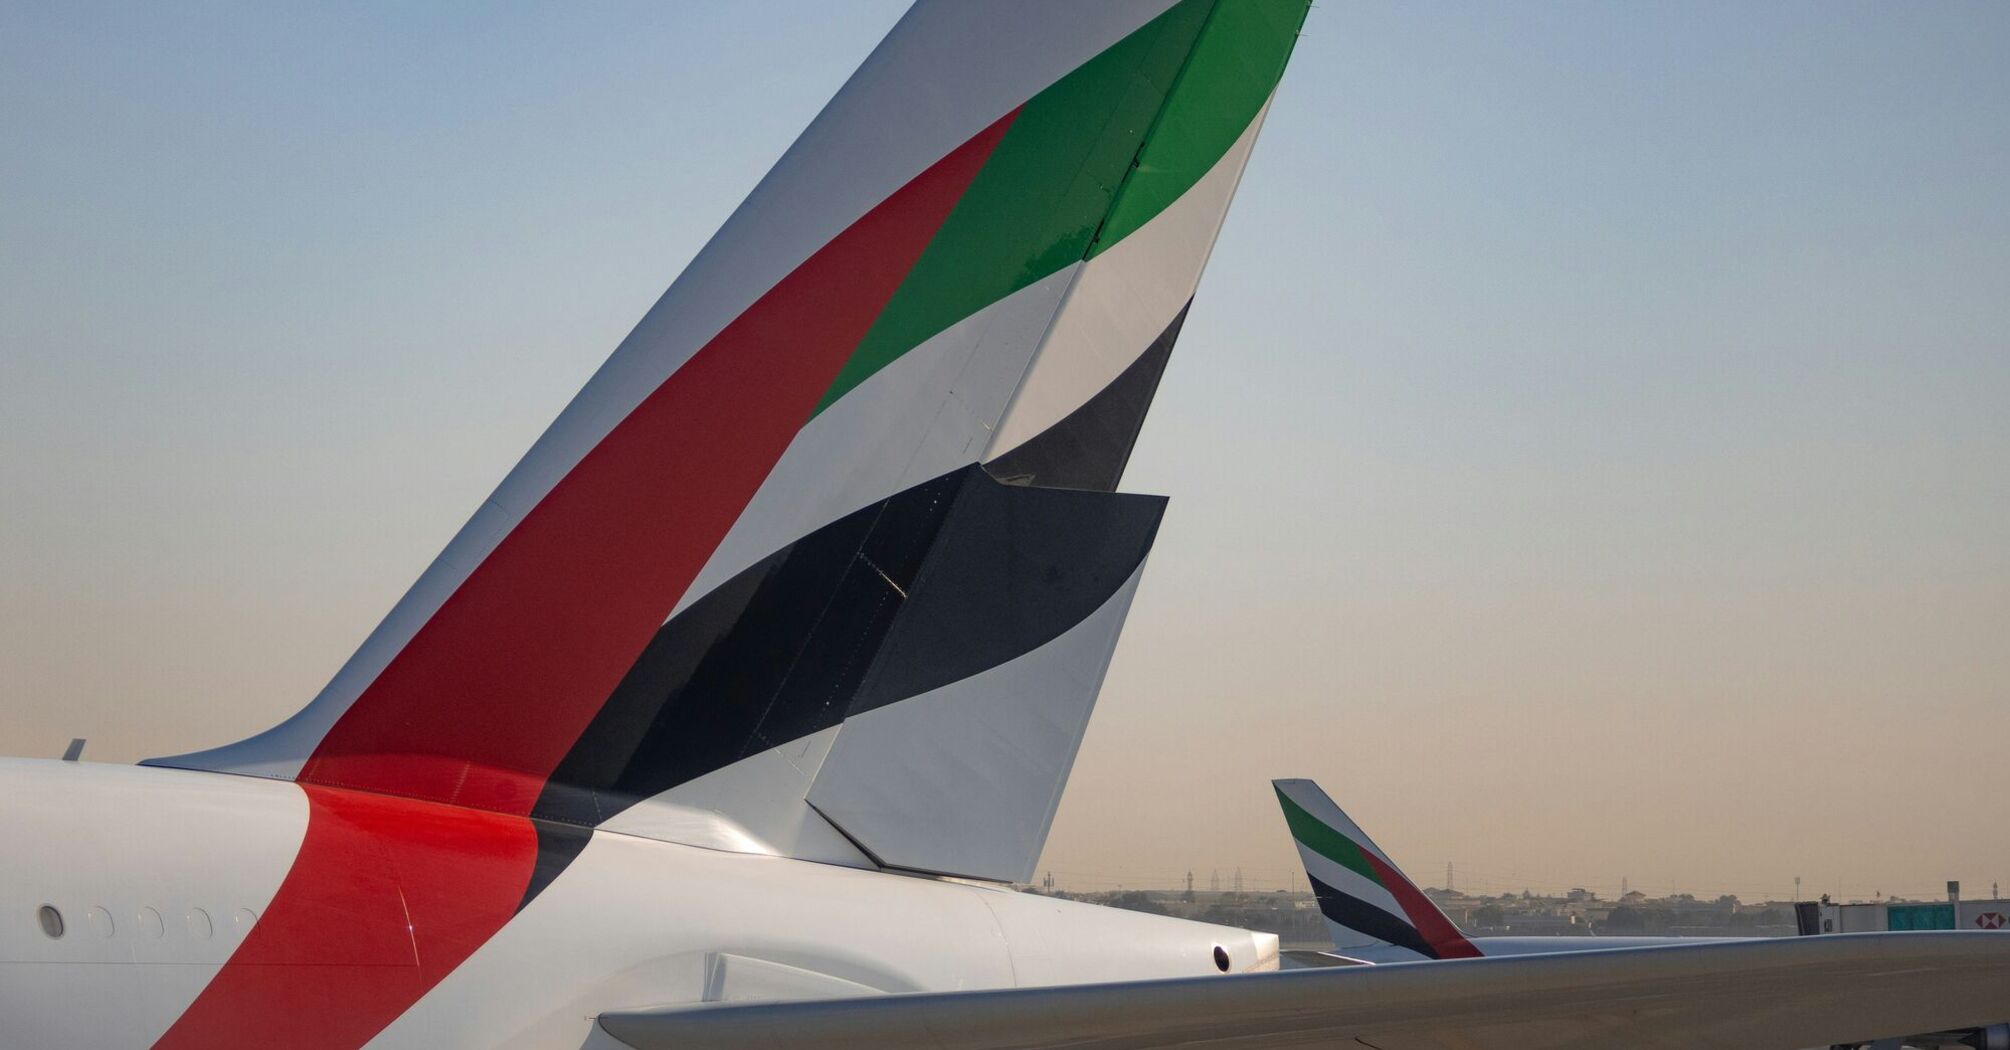 Тails of Emirates aircraft with iconic red, black, white, and green design, on the tarmac with a clear sky in the background